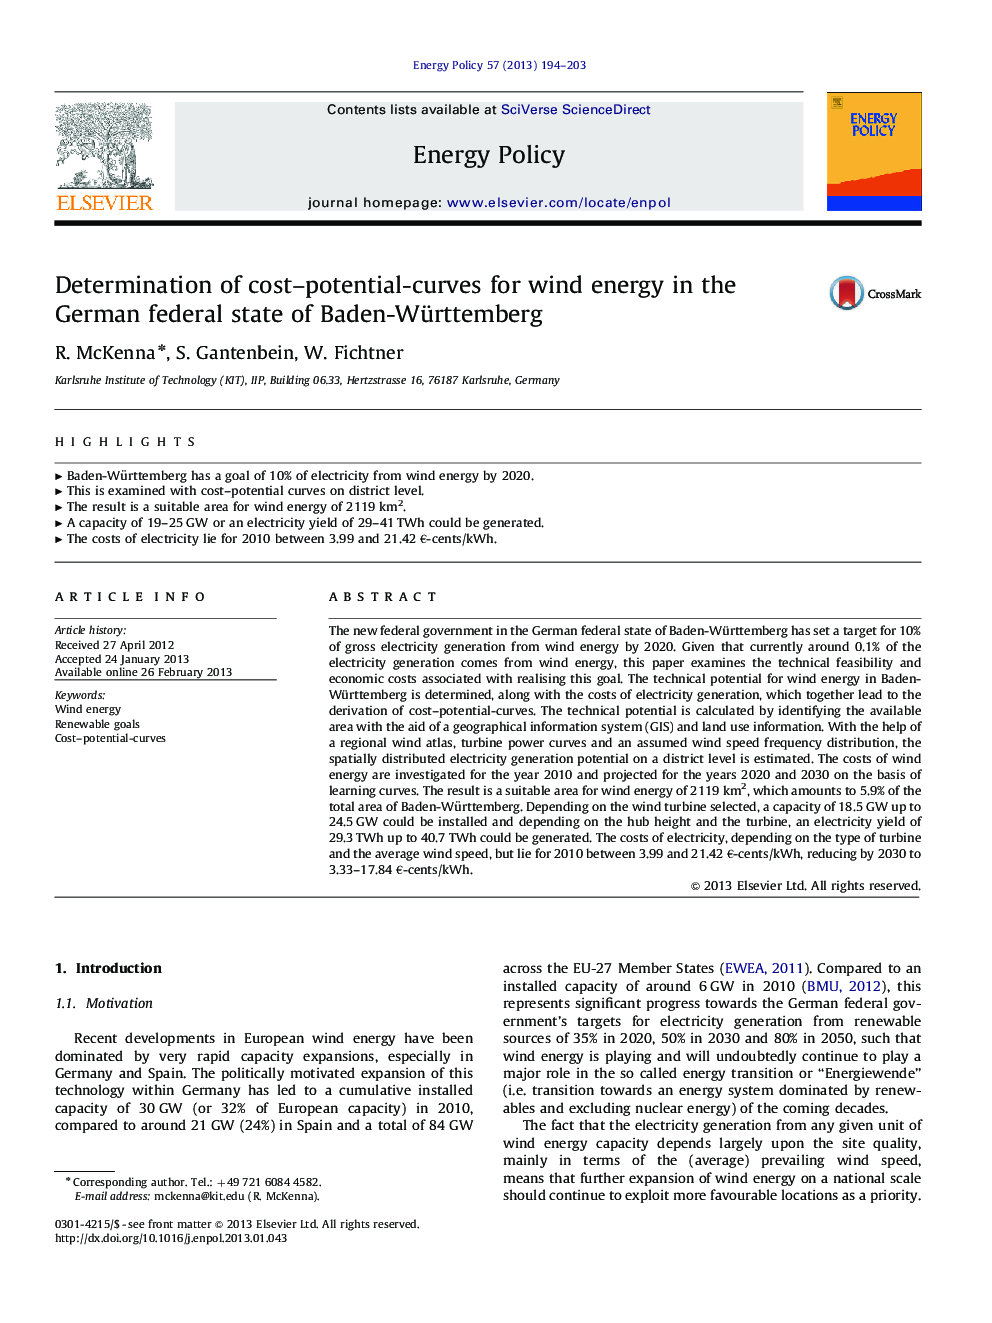 Determination of cost–potential-curves for wind energy in the German federal state of Baden-Württemberg